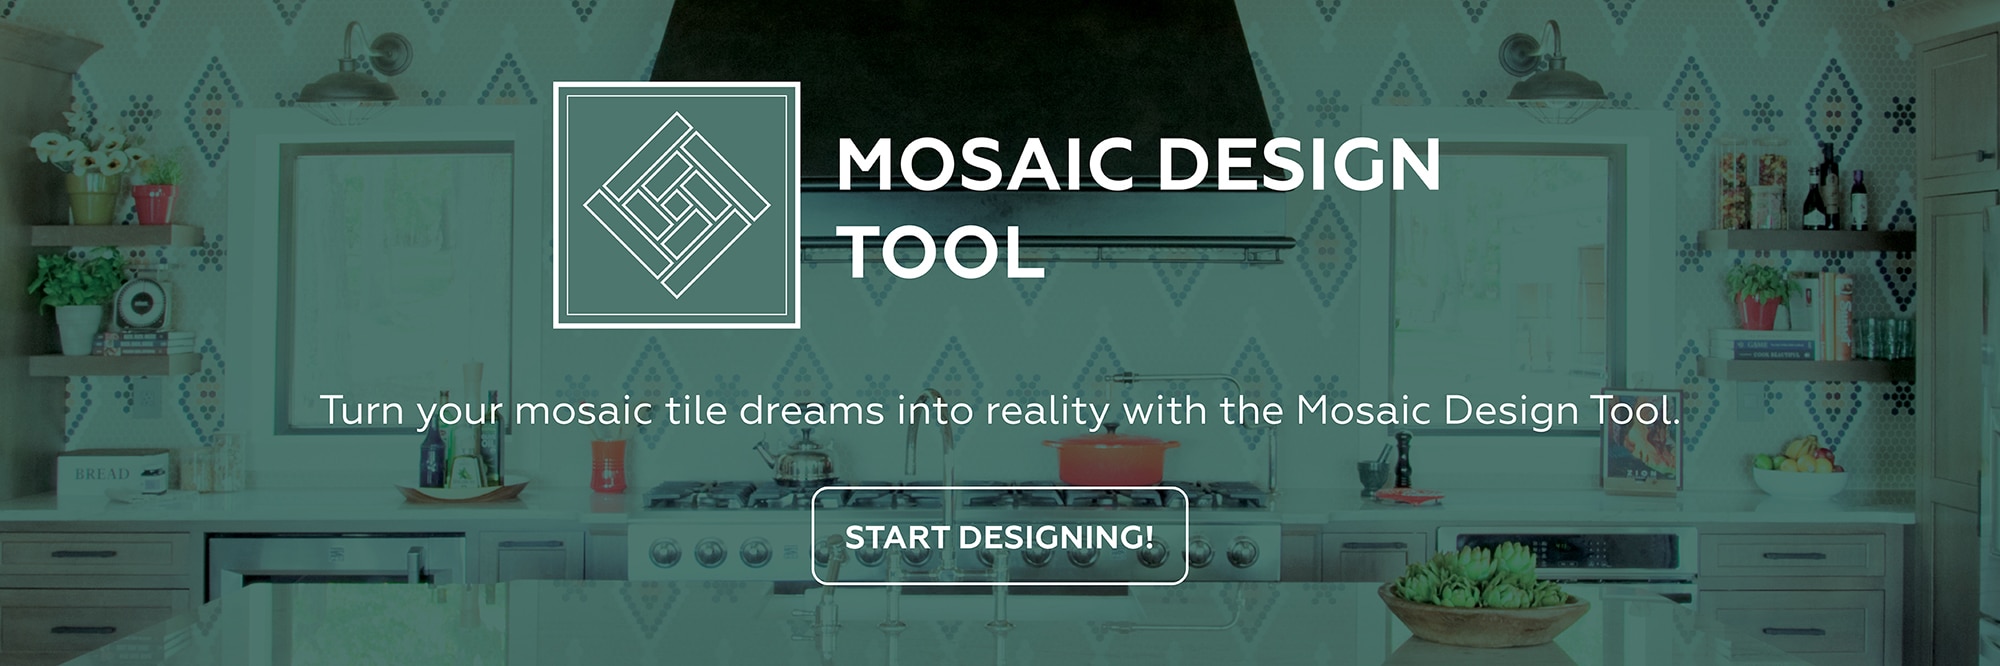 Turn your mosaic tile dreams into reality with the Mosaic Design Tool.